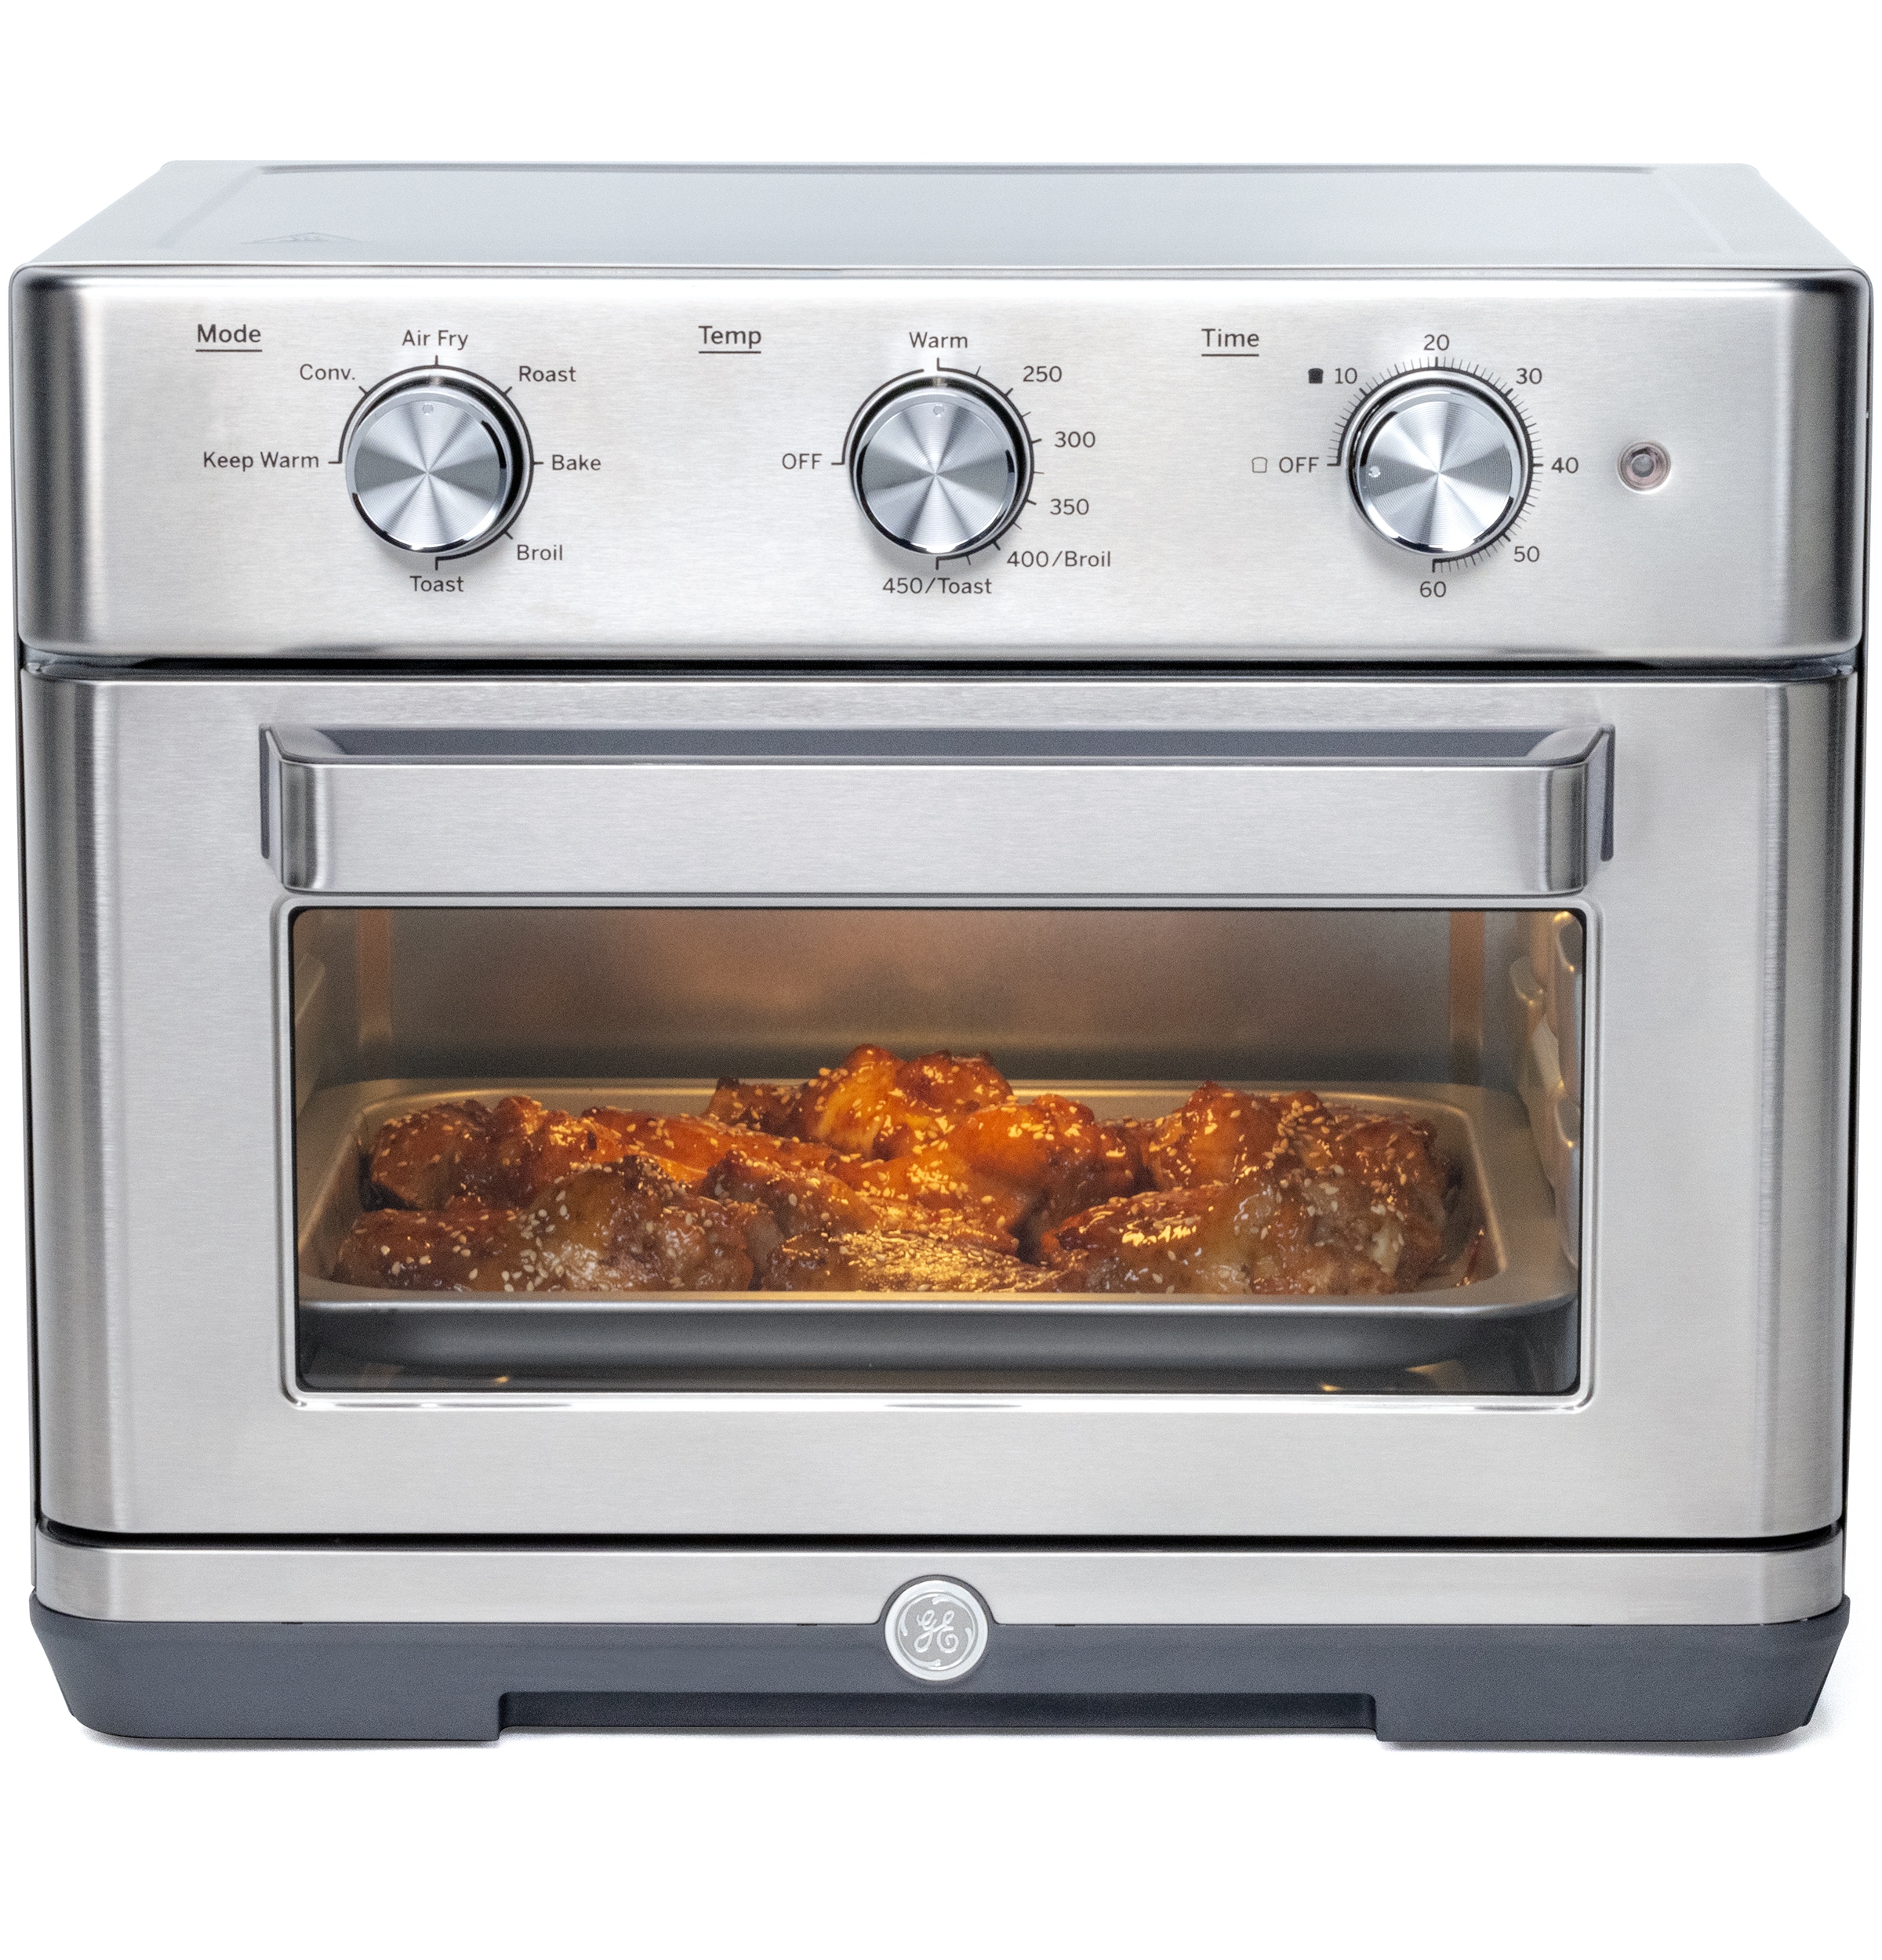 Pull Out Crumb Tray - Bravo Toaster Oven & Air Fryer